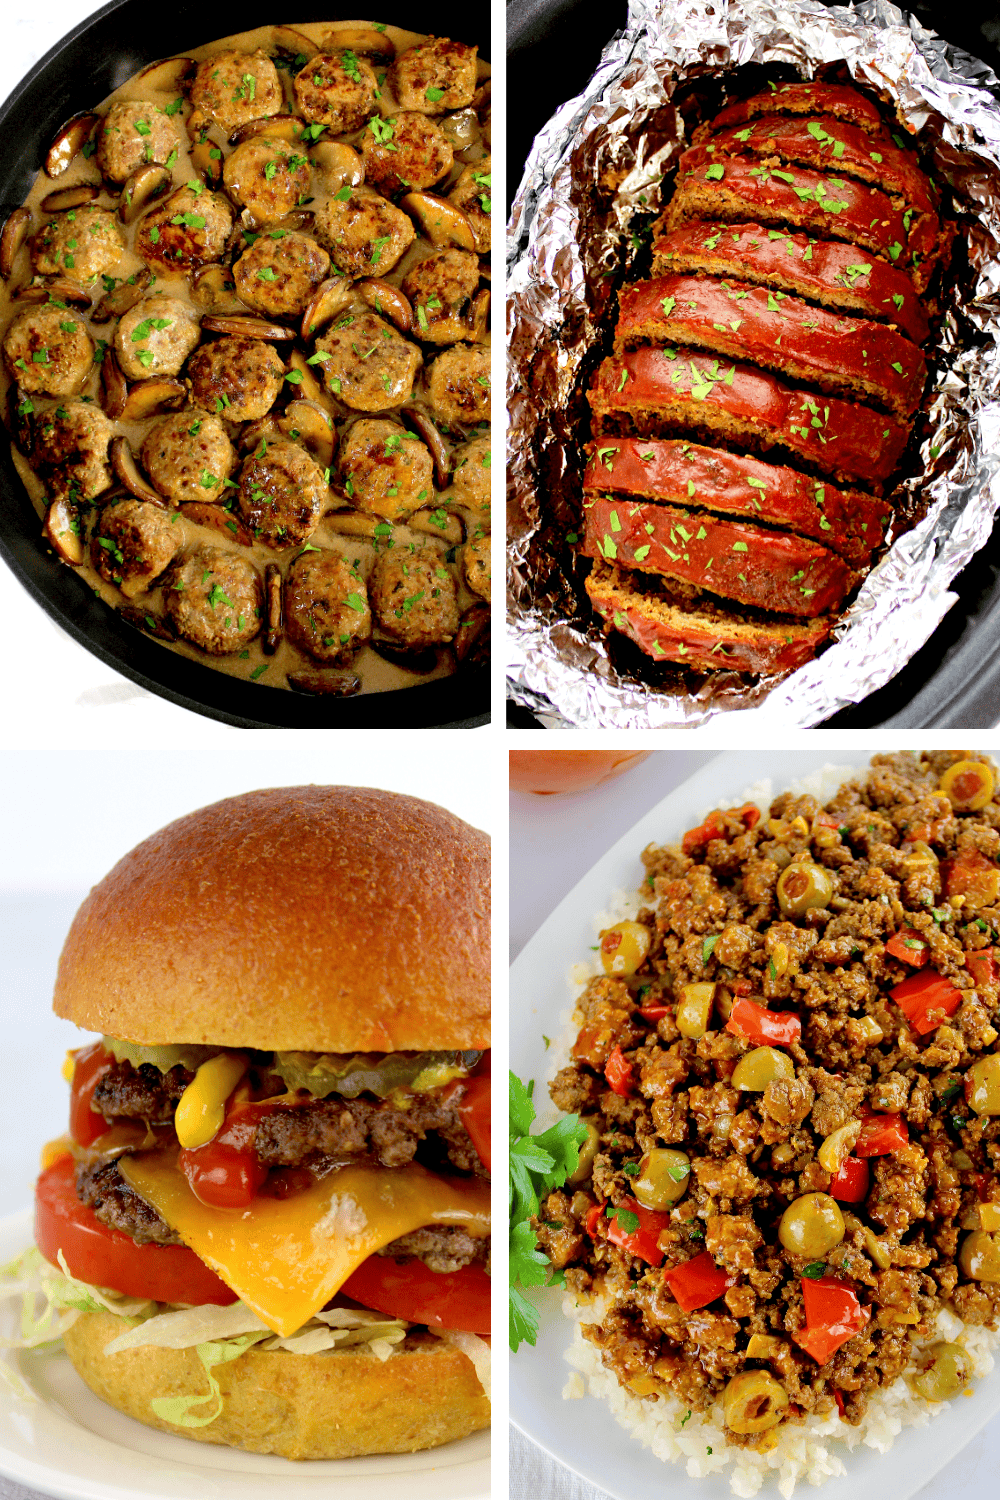 10 Easy Keto Ground Beef Recipes to Try - Keto Cooking Christian